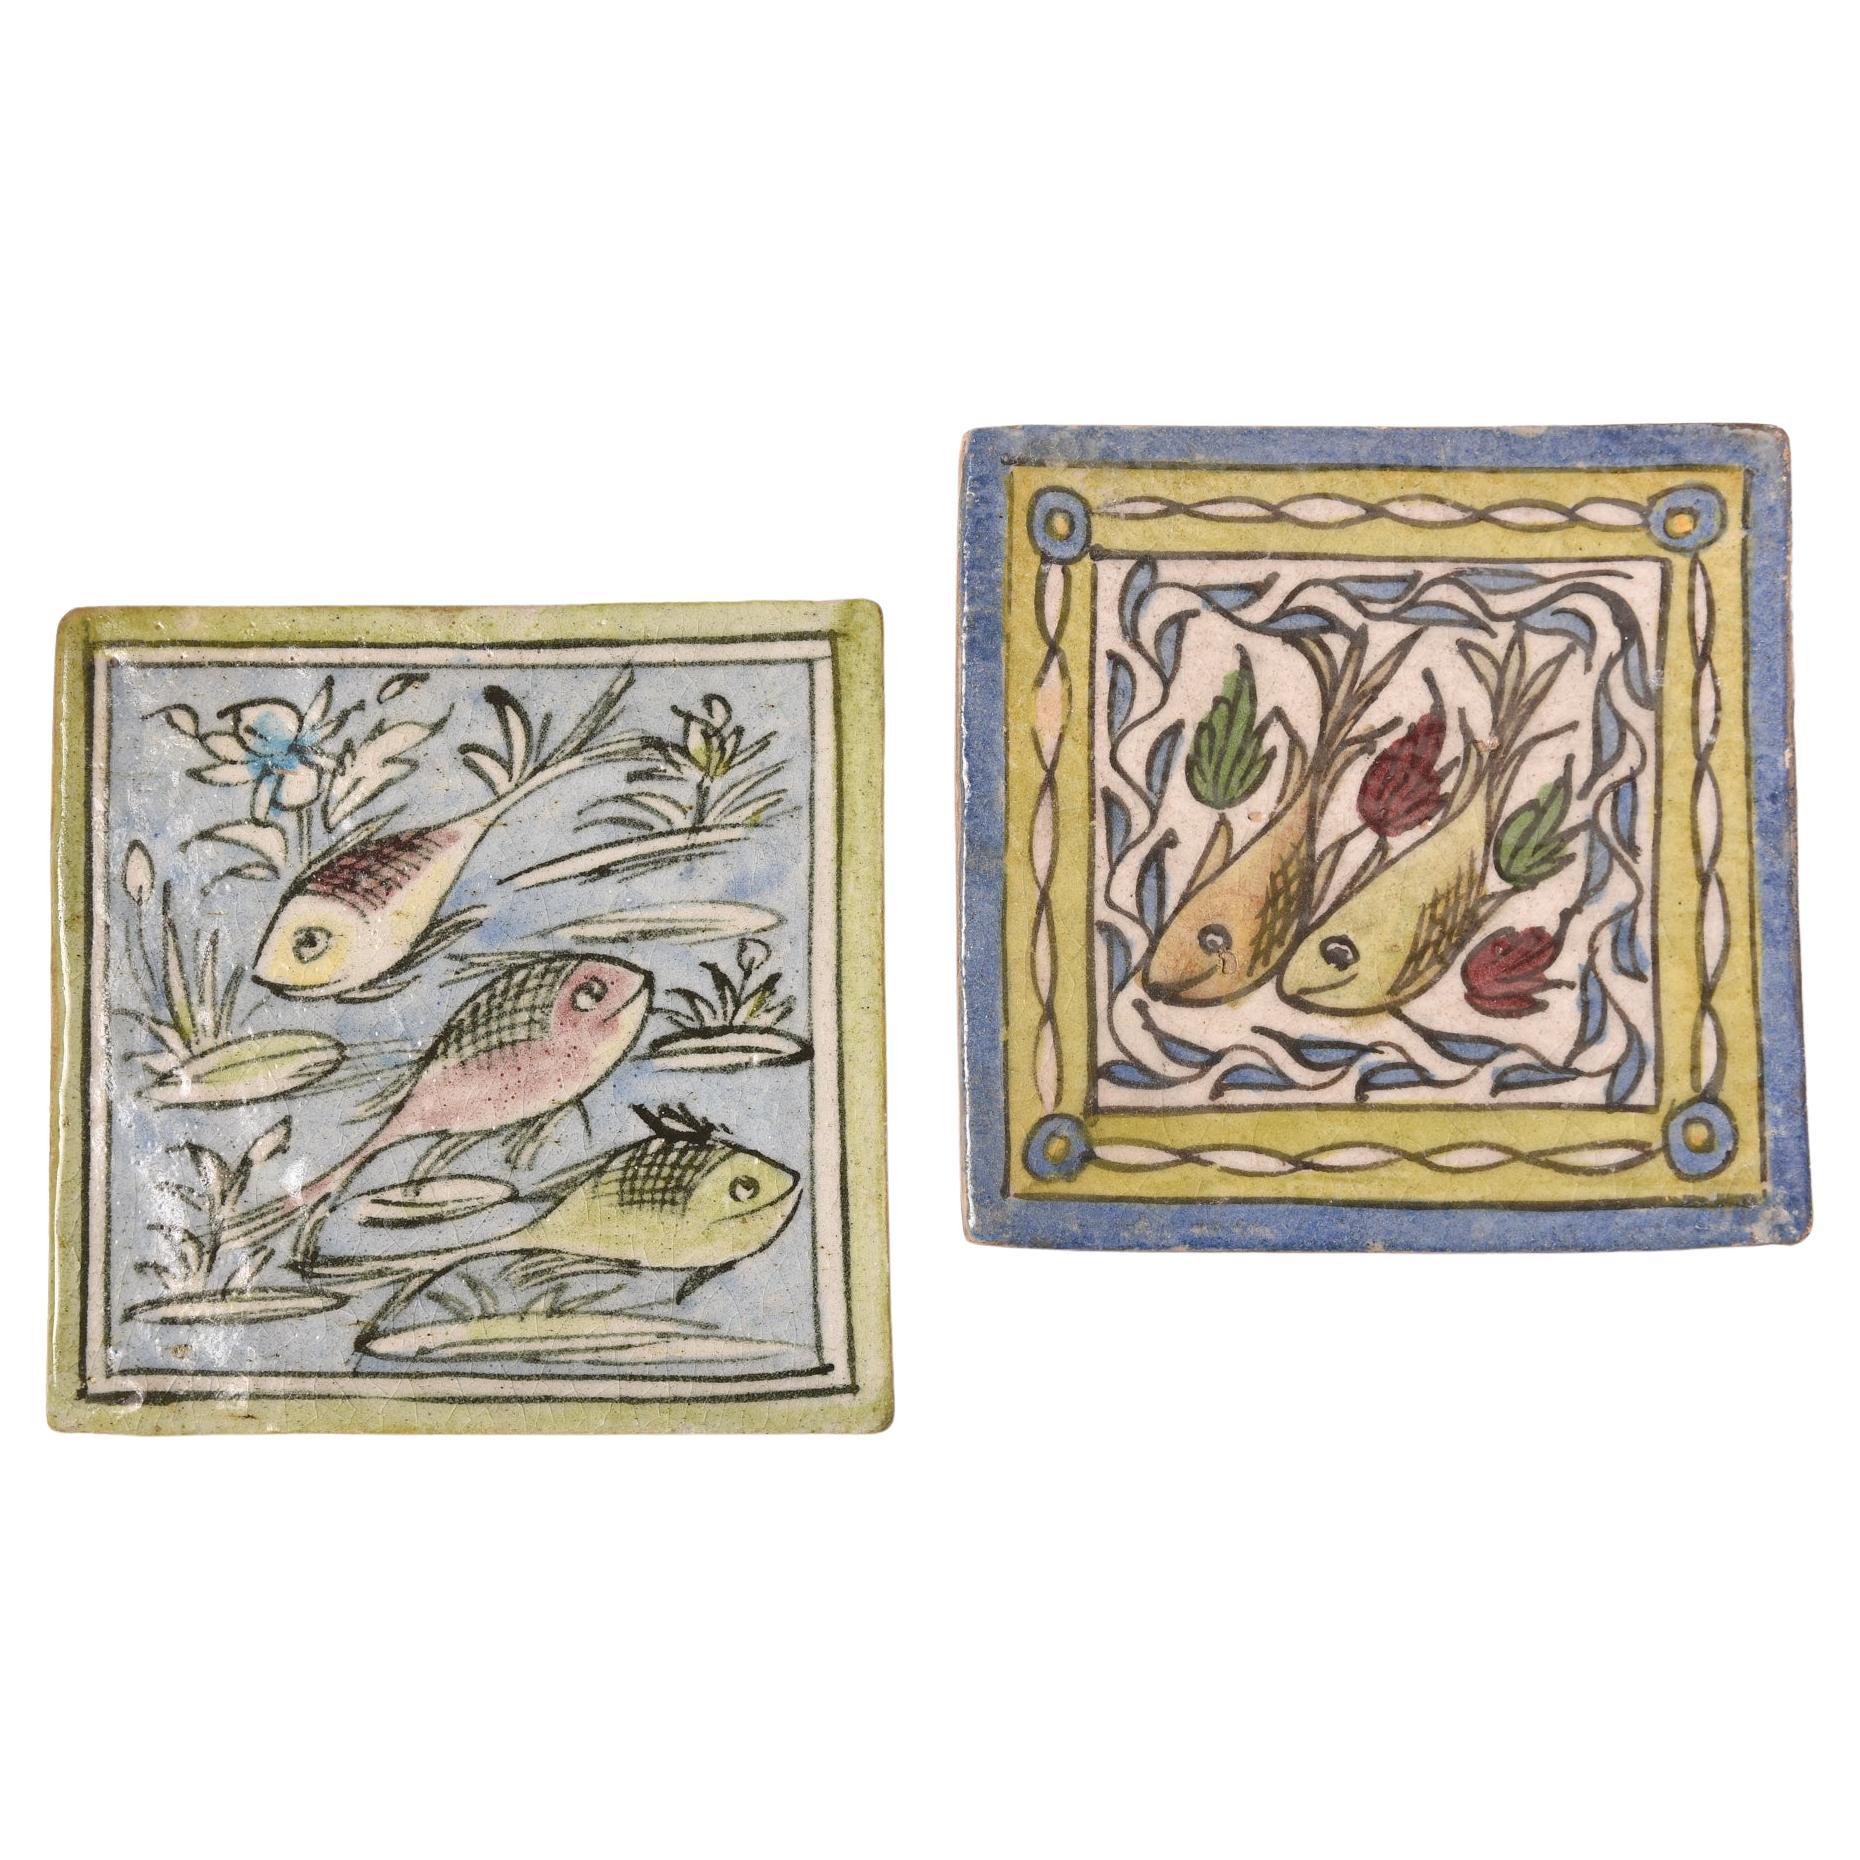 Old Hand Painted "Fish" Tiles 